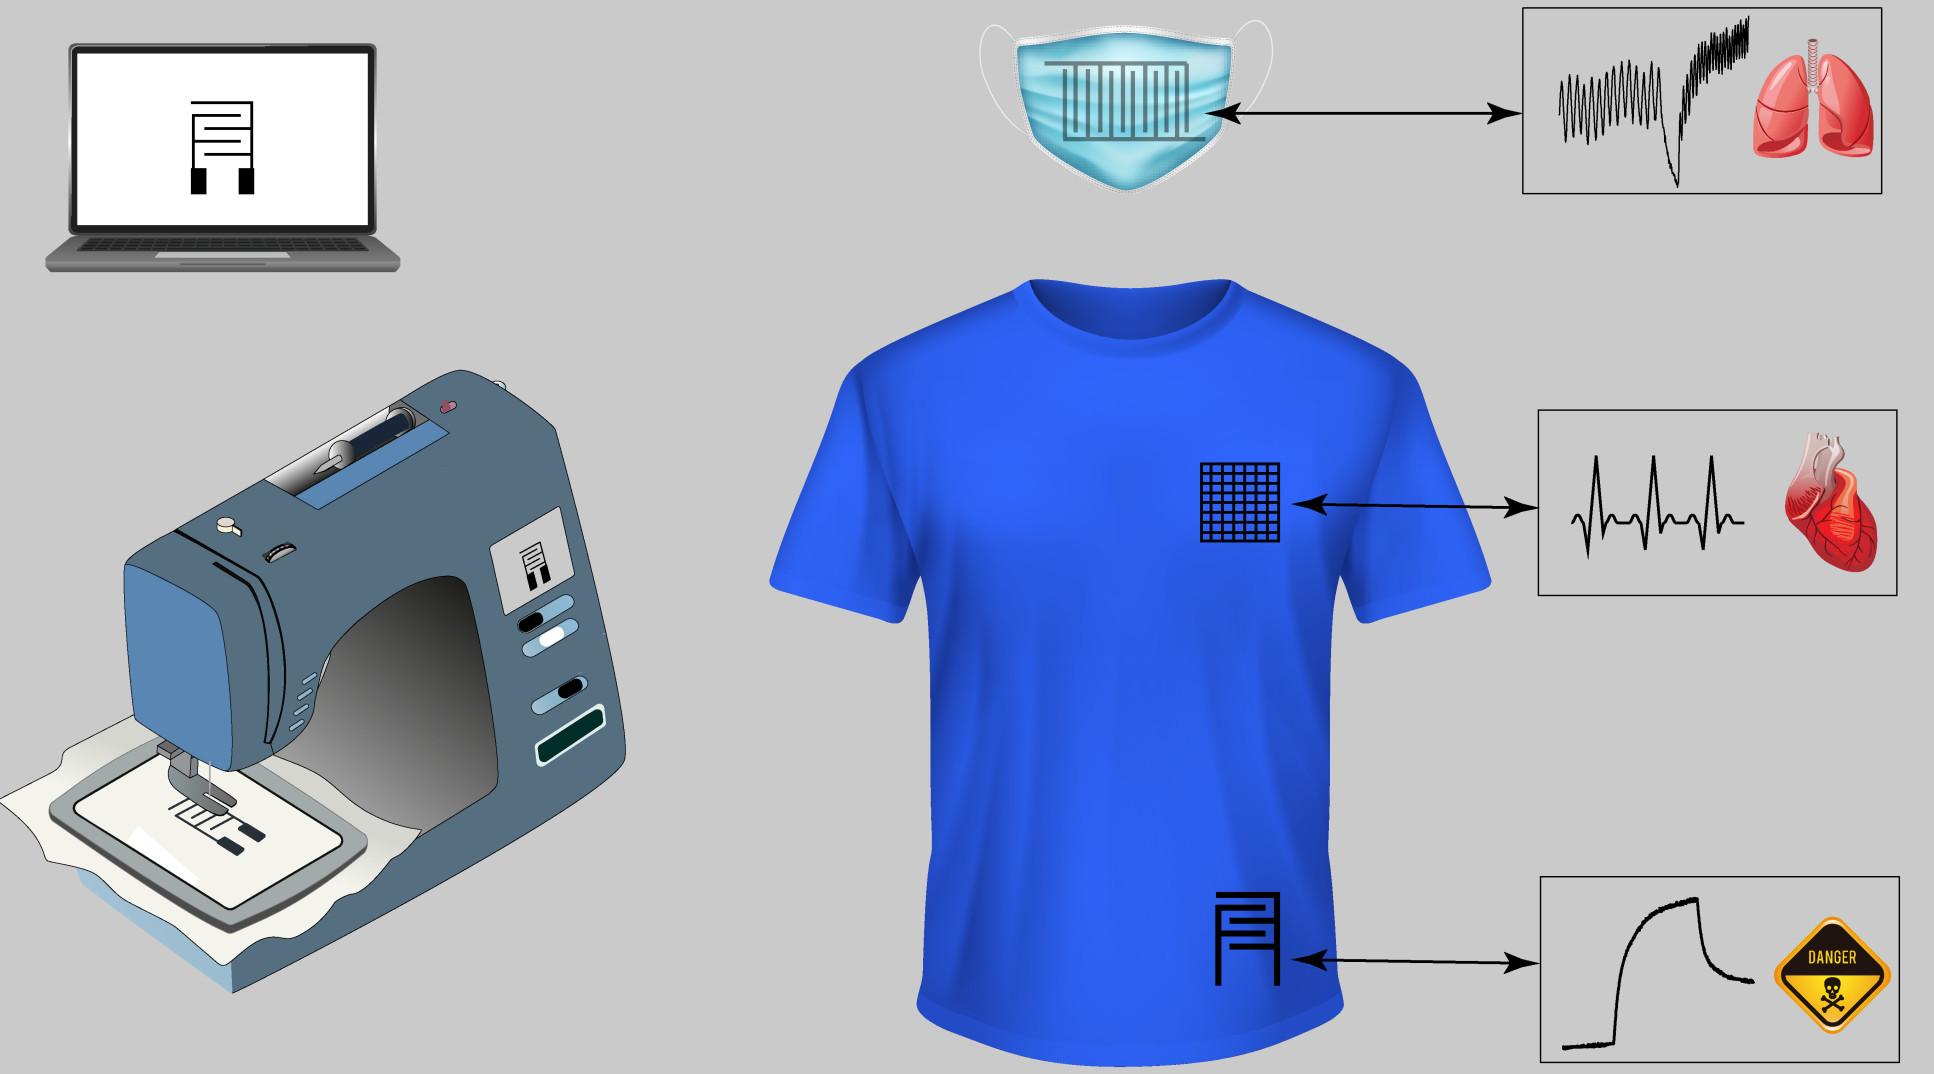 Sensors embedded into a face mask and t-shirt